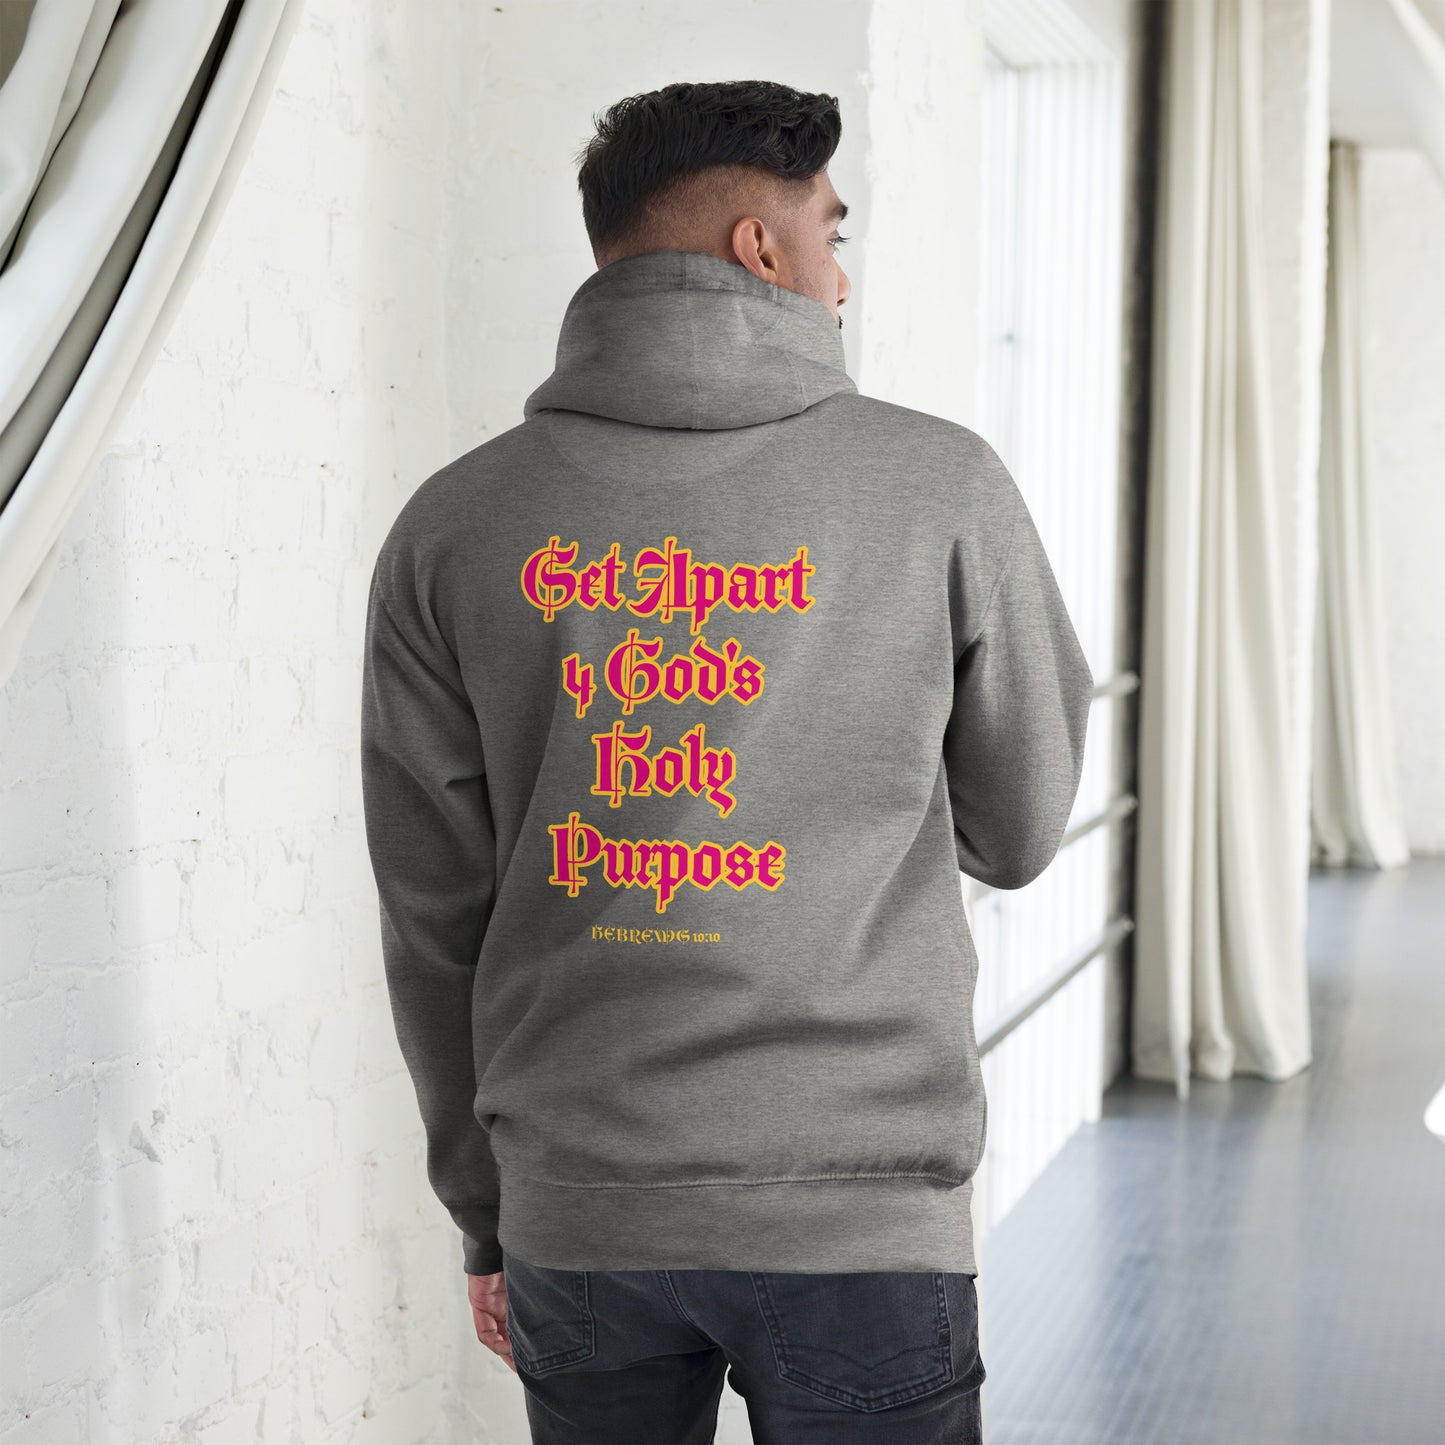 SANCTIFIED SIGNATURE- EMBROIDERED FRONT Unisex Hoodie